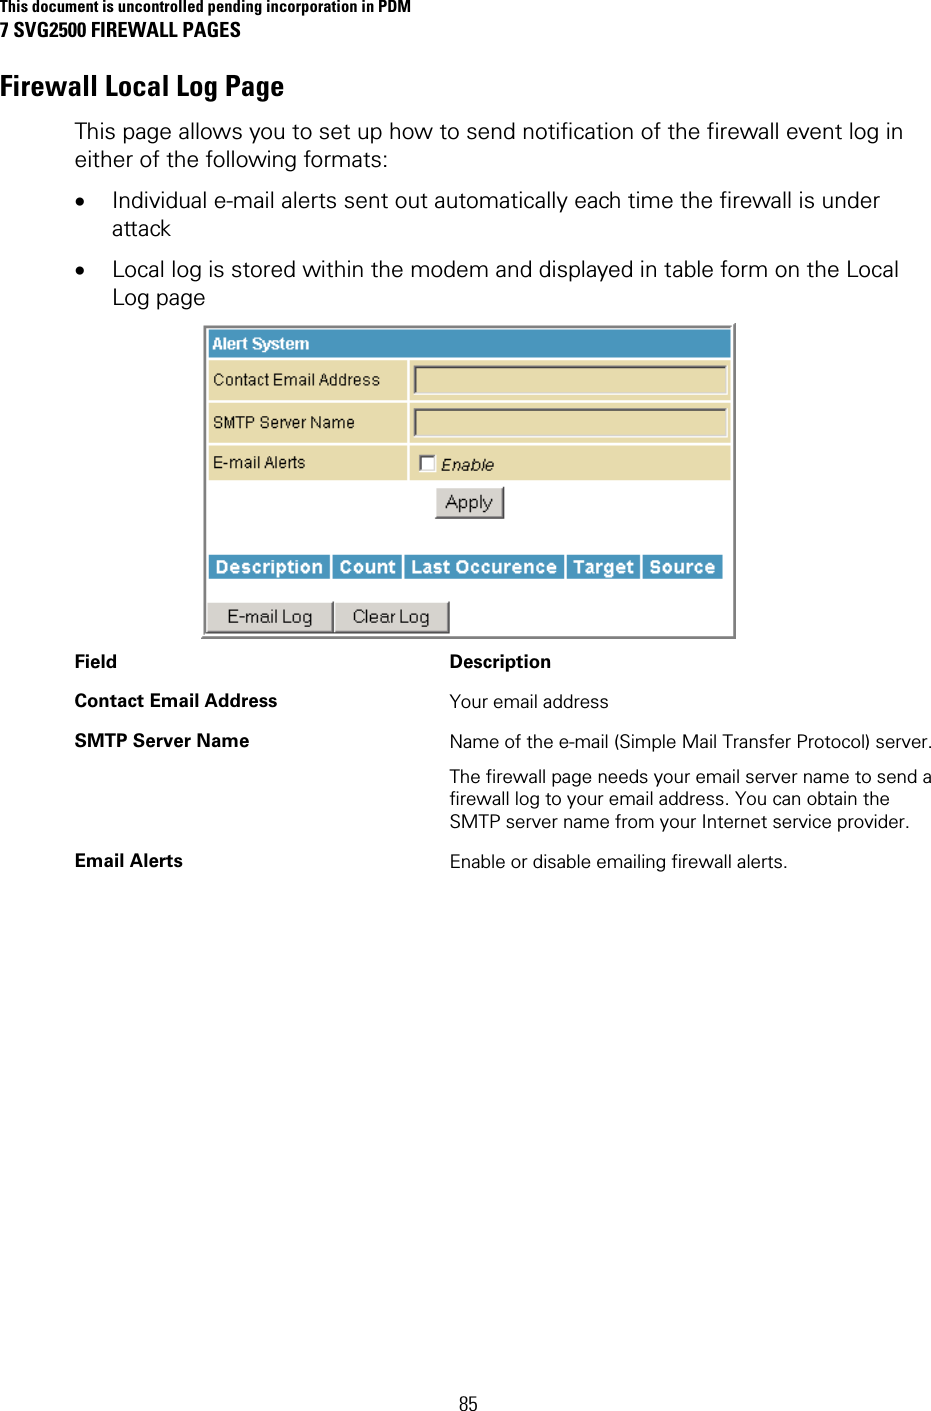 This document is uncontrolled pending incorporation in PDM 7 SVG2500 FIREWALL PAGES  85 Firewall Local Log Page This page allows you to set up how to send notification of the firewall event log in either of the following formats: • Individual e-mail alerts sent out automatically each time the firewall is under attack • Local log is stored within the modem and displayed in table form on the Local Log page  Field Description Contact Email Address  Your email address SMTP Server Name  Name of the e-mail (Simple Mail Transfer Protocol) server. The firewall page needs your email server name to send a firewall log to your email address. You can obtain the SMTP server name from your Internet service provider. Email Alerts  Enable or disable emailing firewall alerts. 